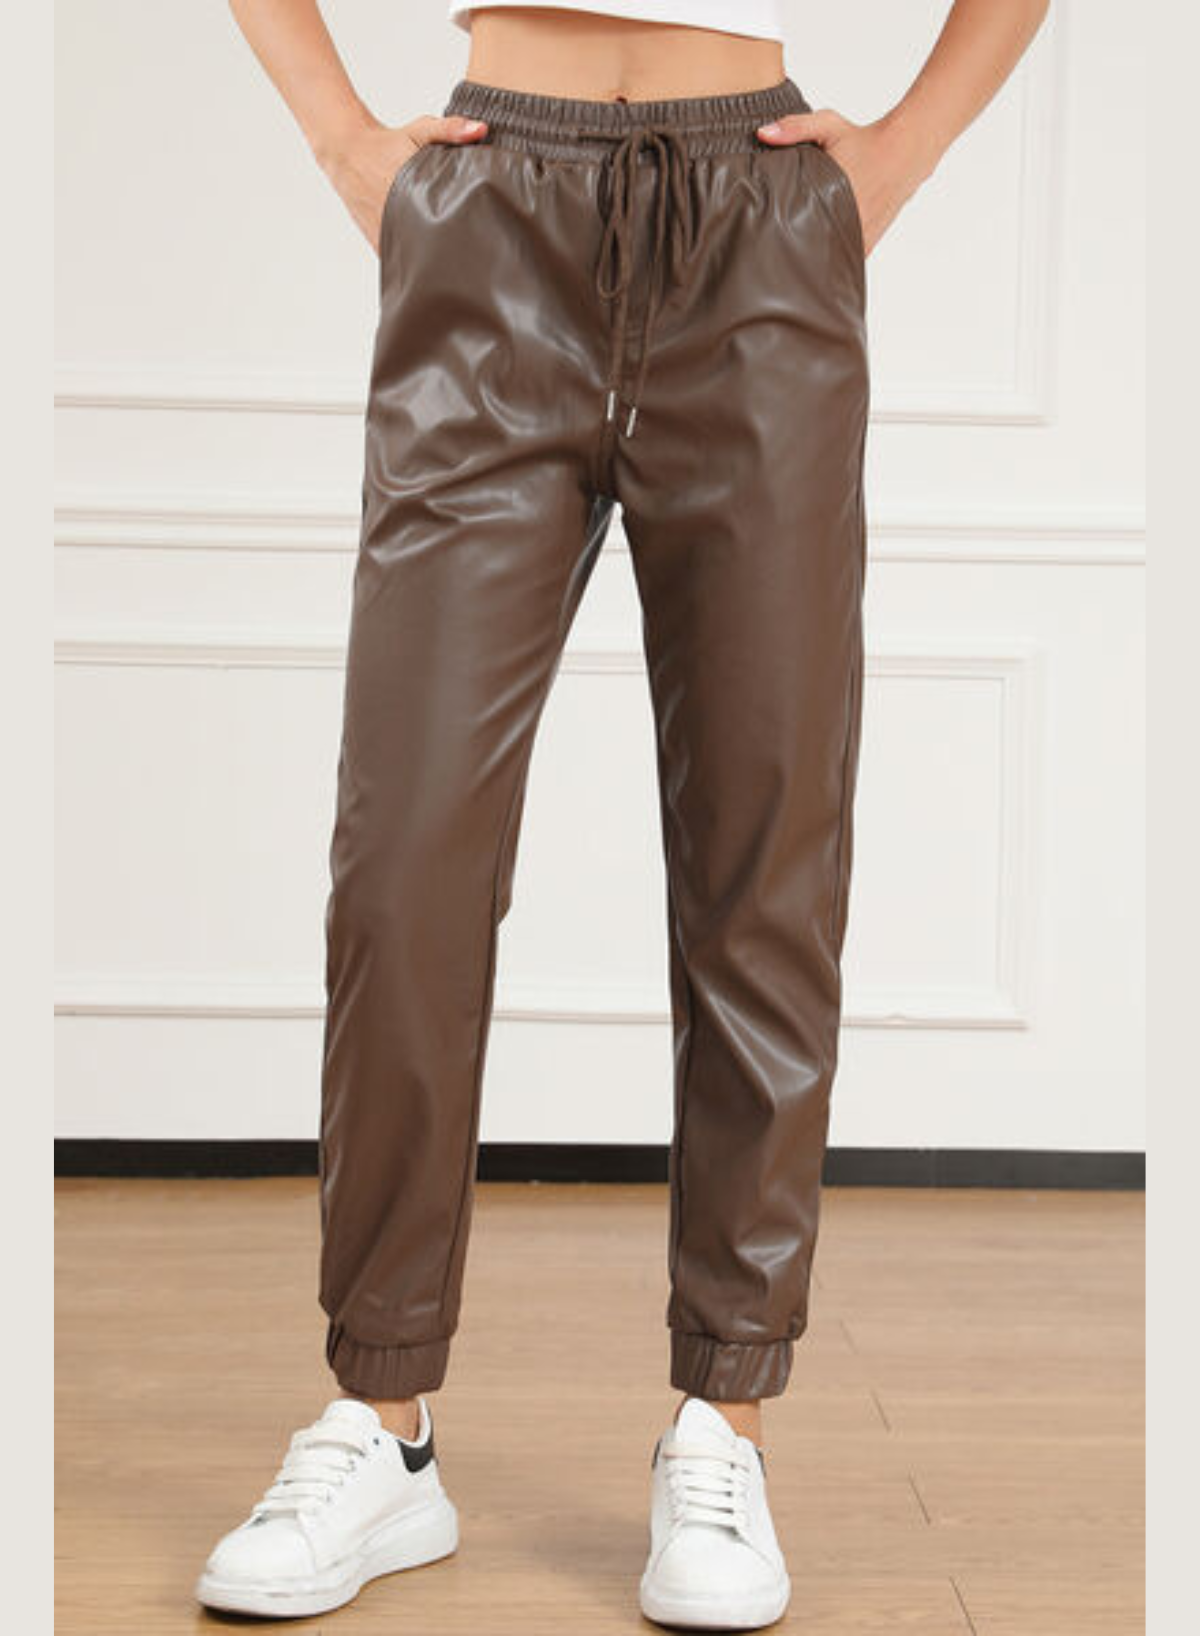 Sassy Tie Faux Leather Trousers